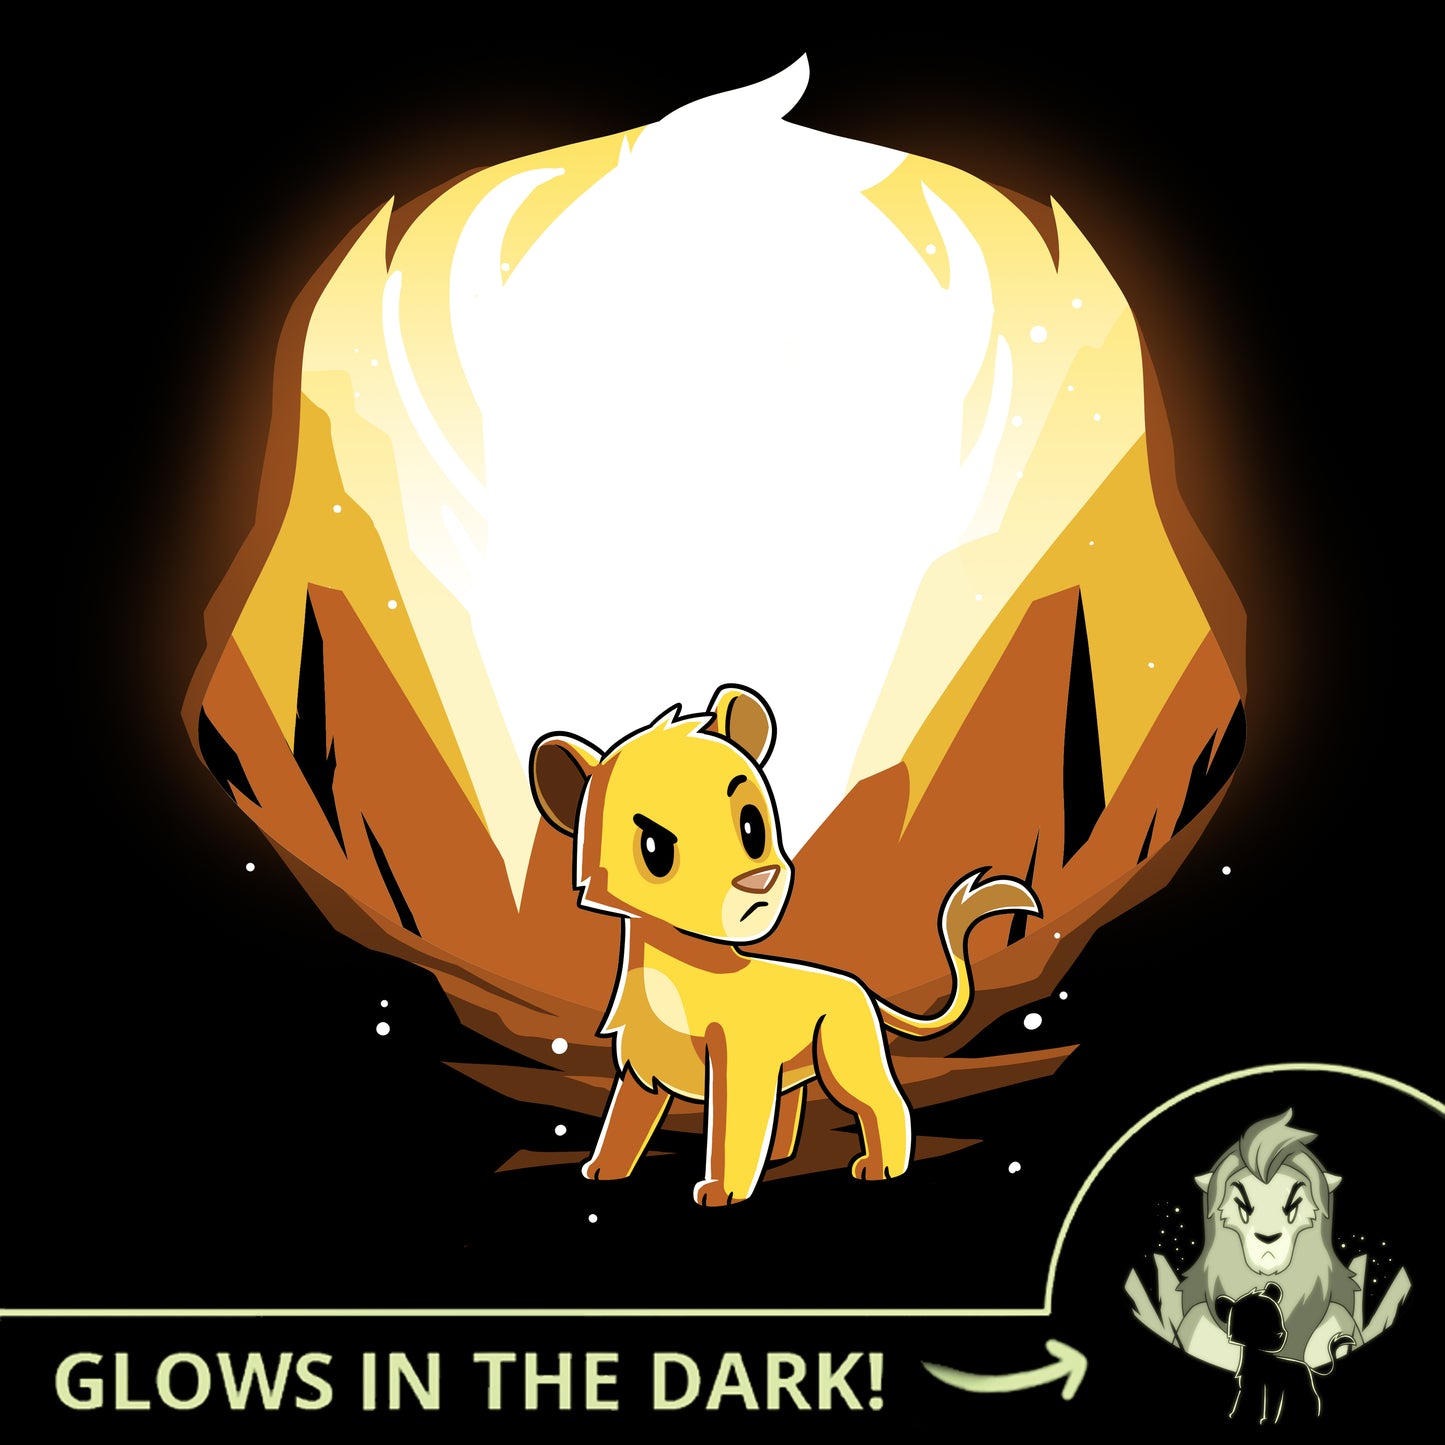 The Simba and Scar (Glow) T-shirt by Disney glows in the dark.